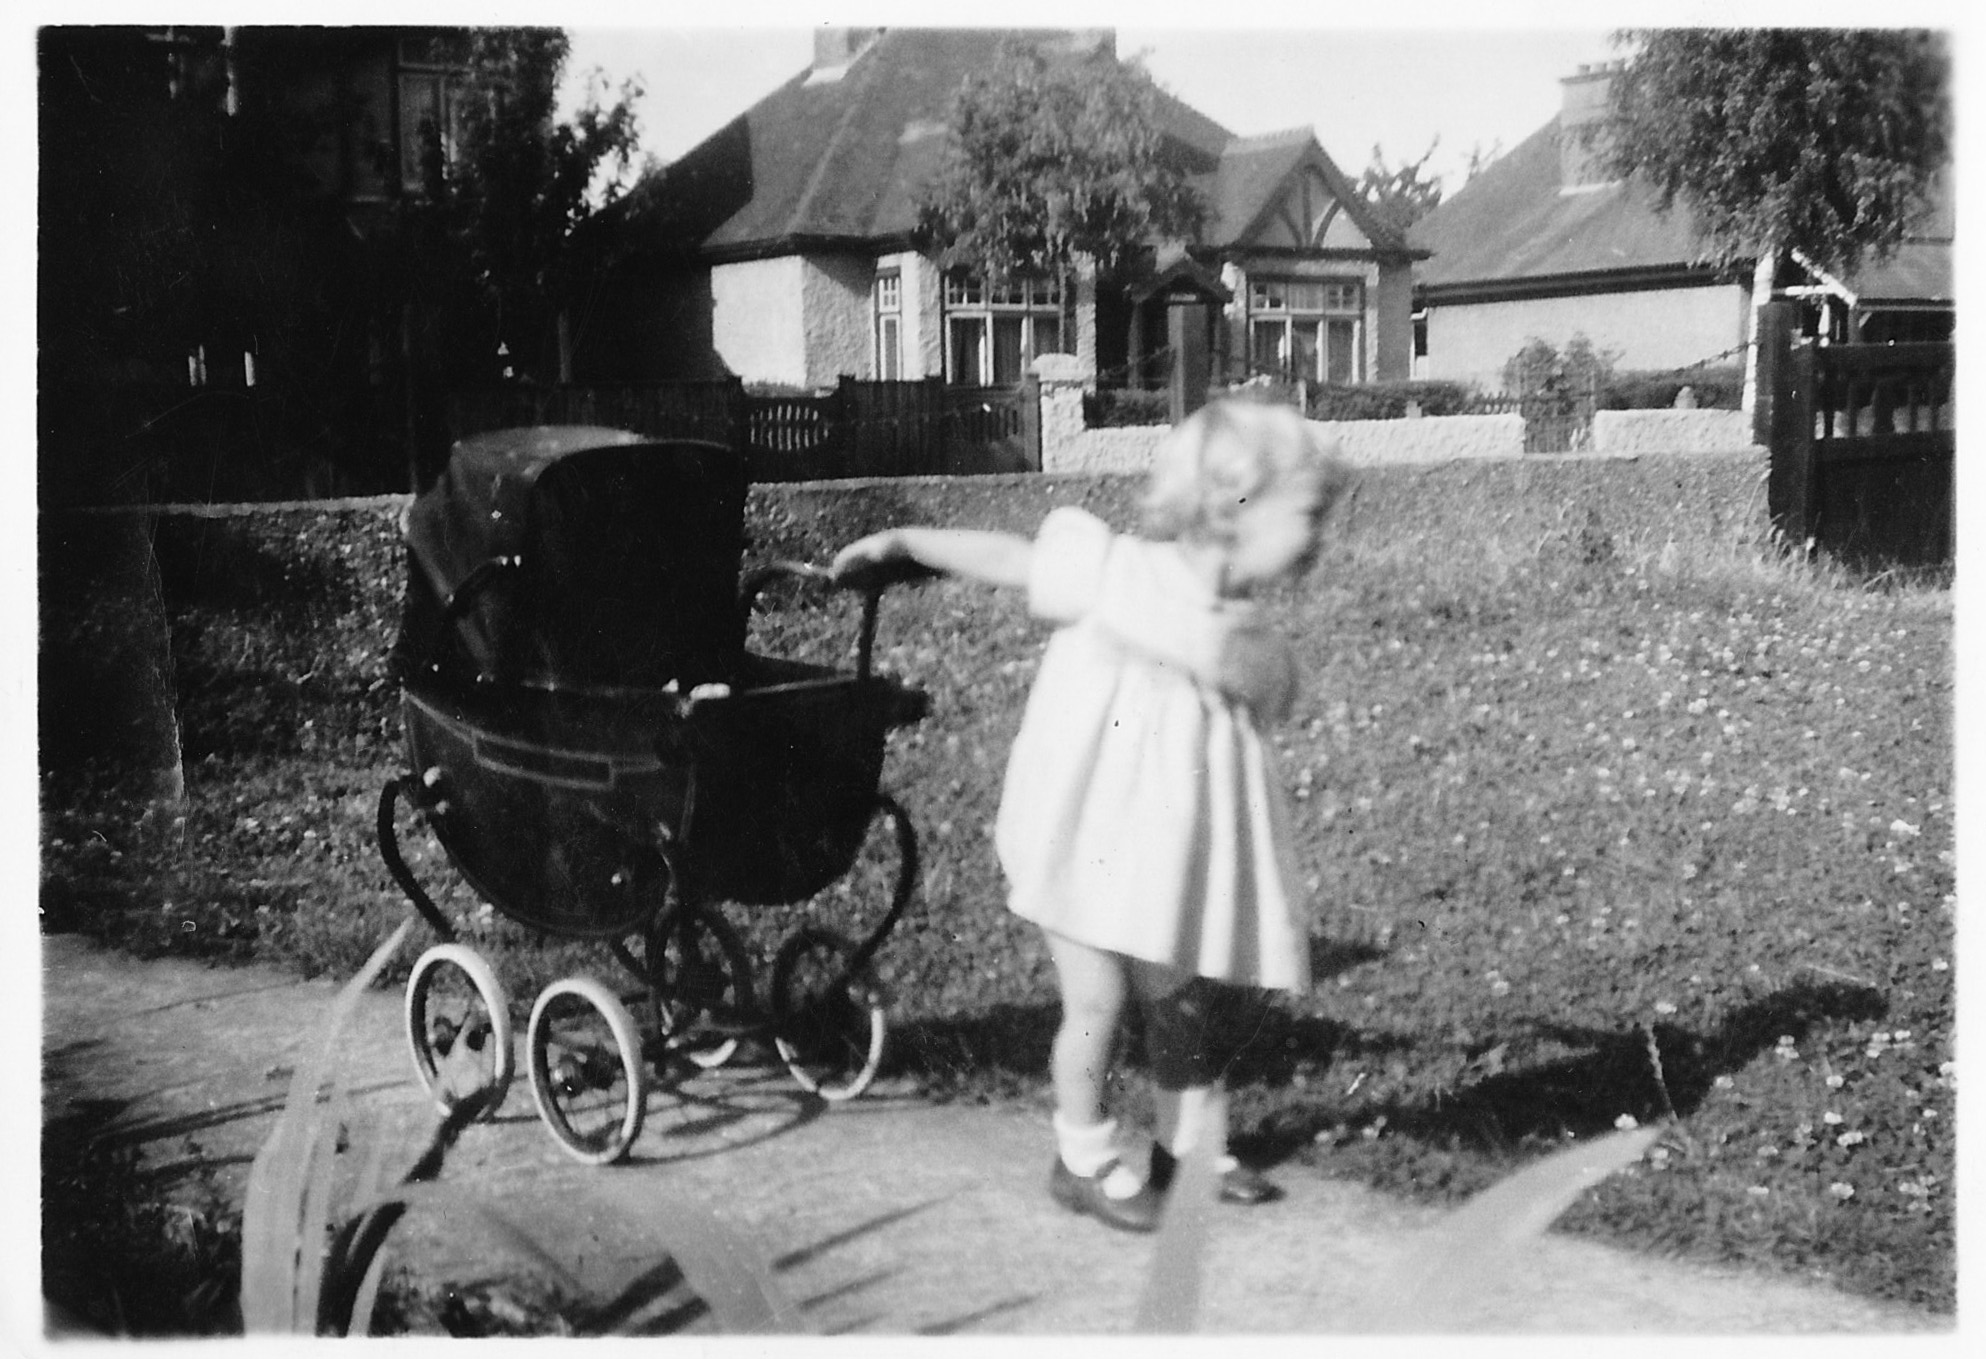 Photo below taken in 1946 of Cheryl Domoney in the front garden of 28 Woodside looking into the street and houses opposite, numbers 29 Woodside (semi-detached house) and 31 Woodside (Bungalow).